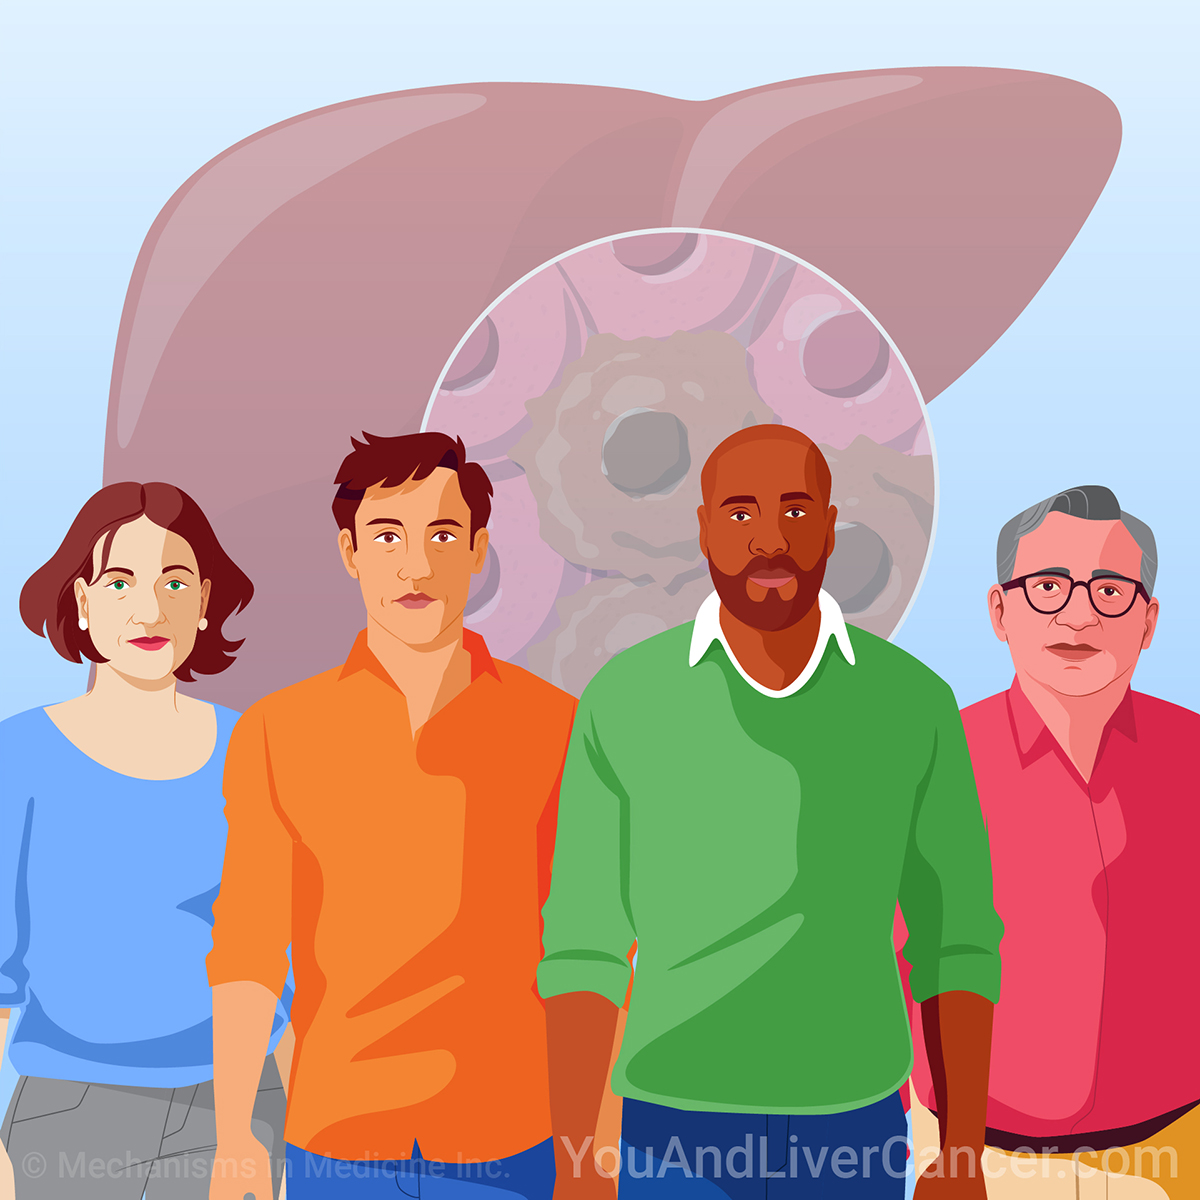 Learn about a variety of topics on liver cancer through short animations